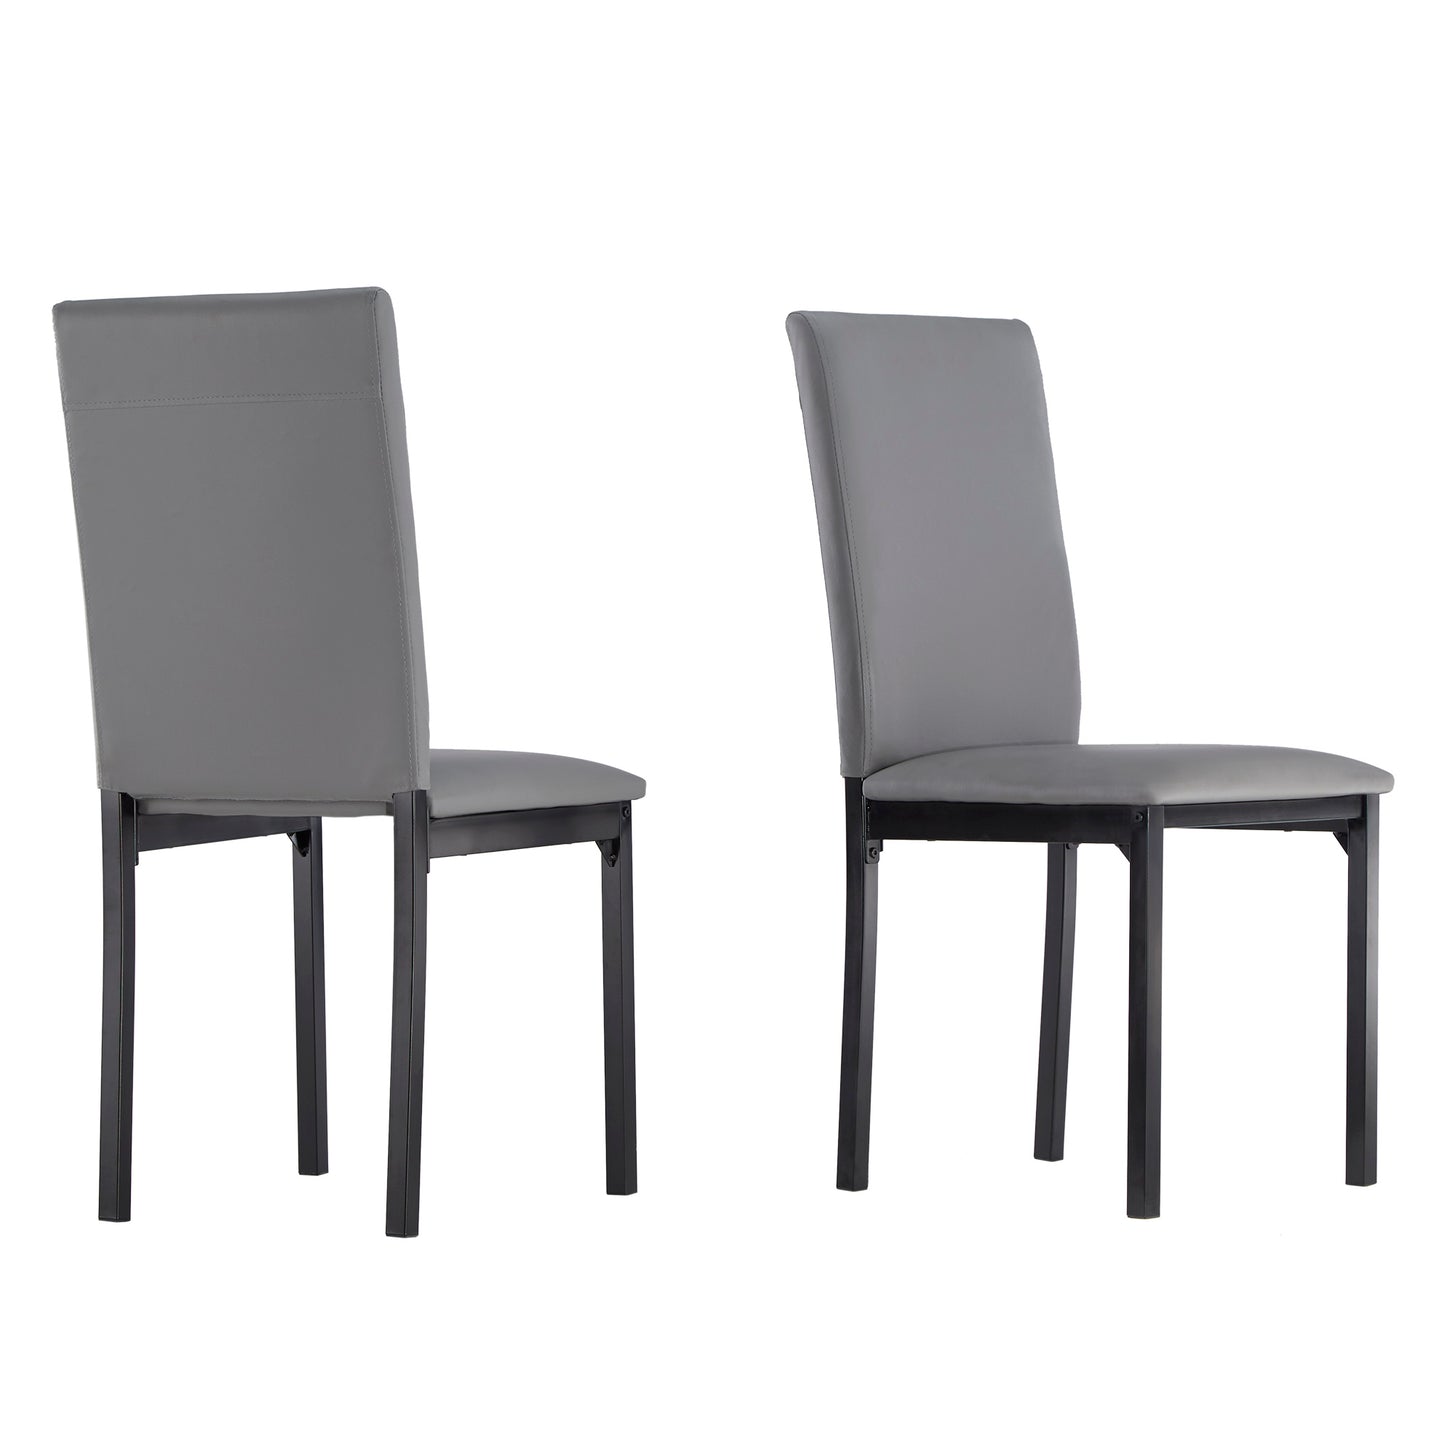 Metal Upholstered Dining Chairs - Grey Faux Leather, Set of 2